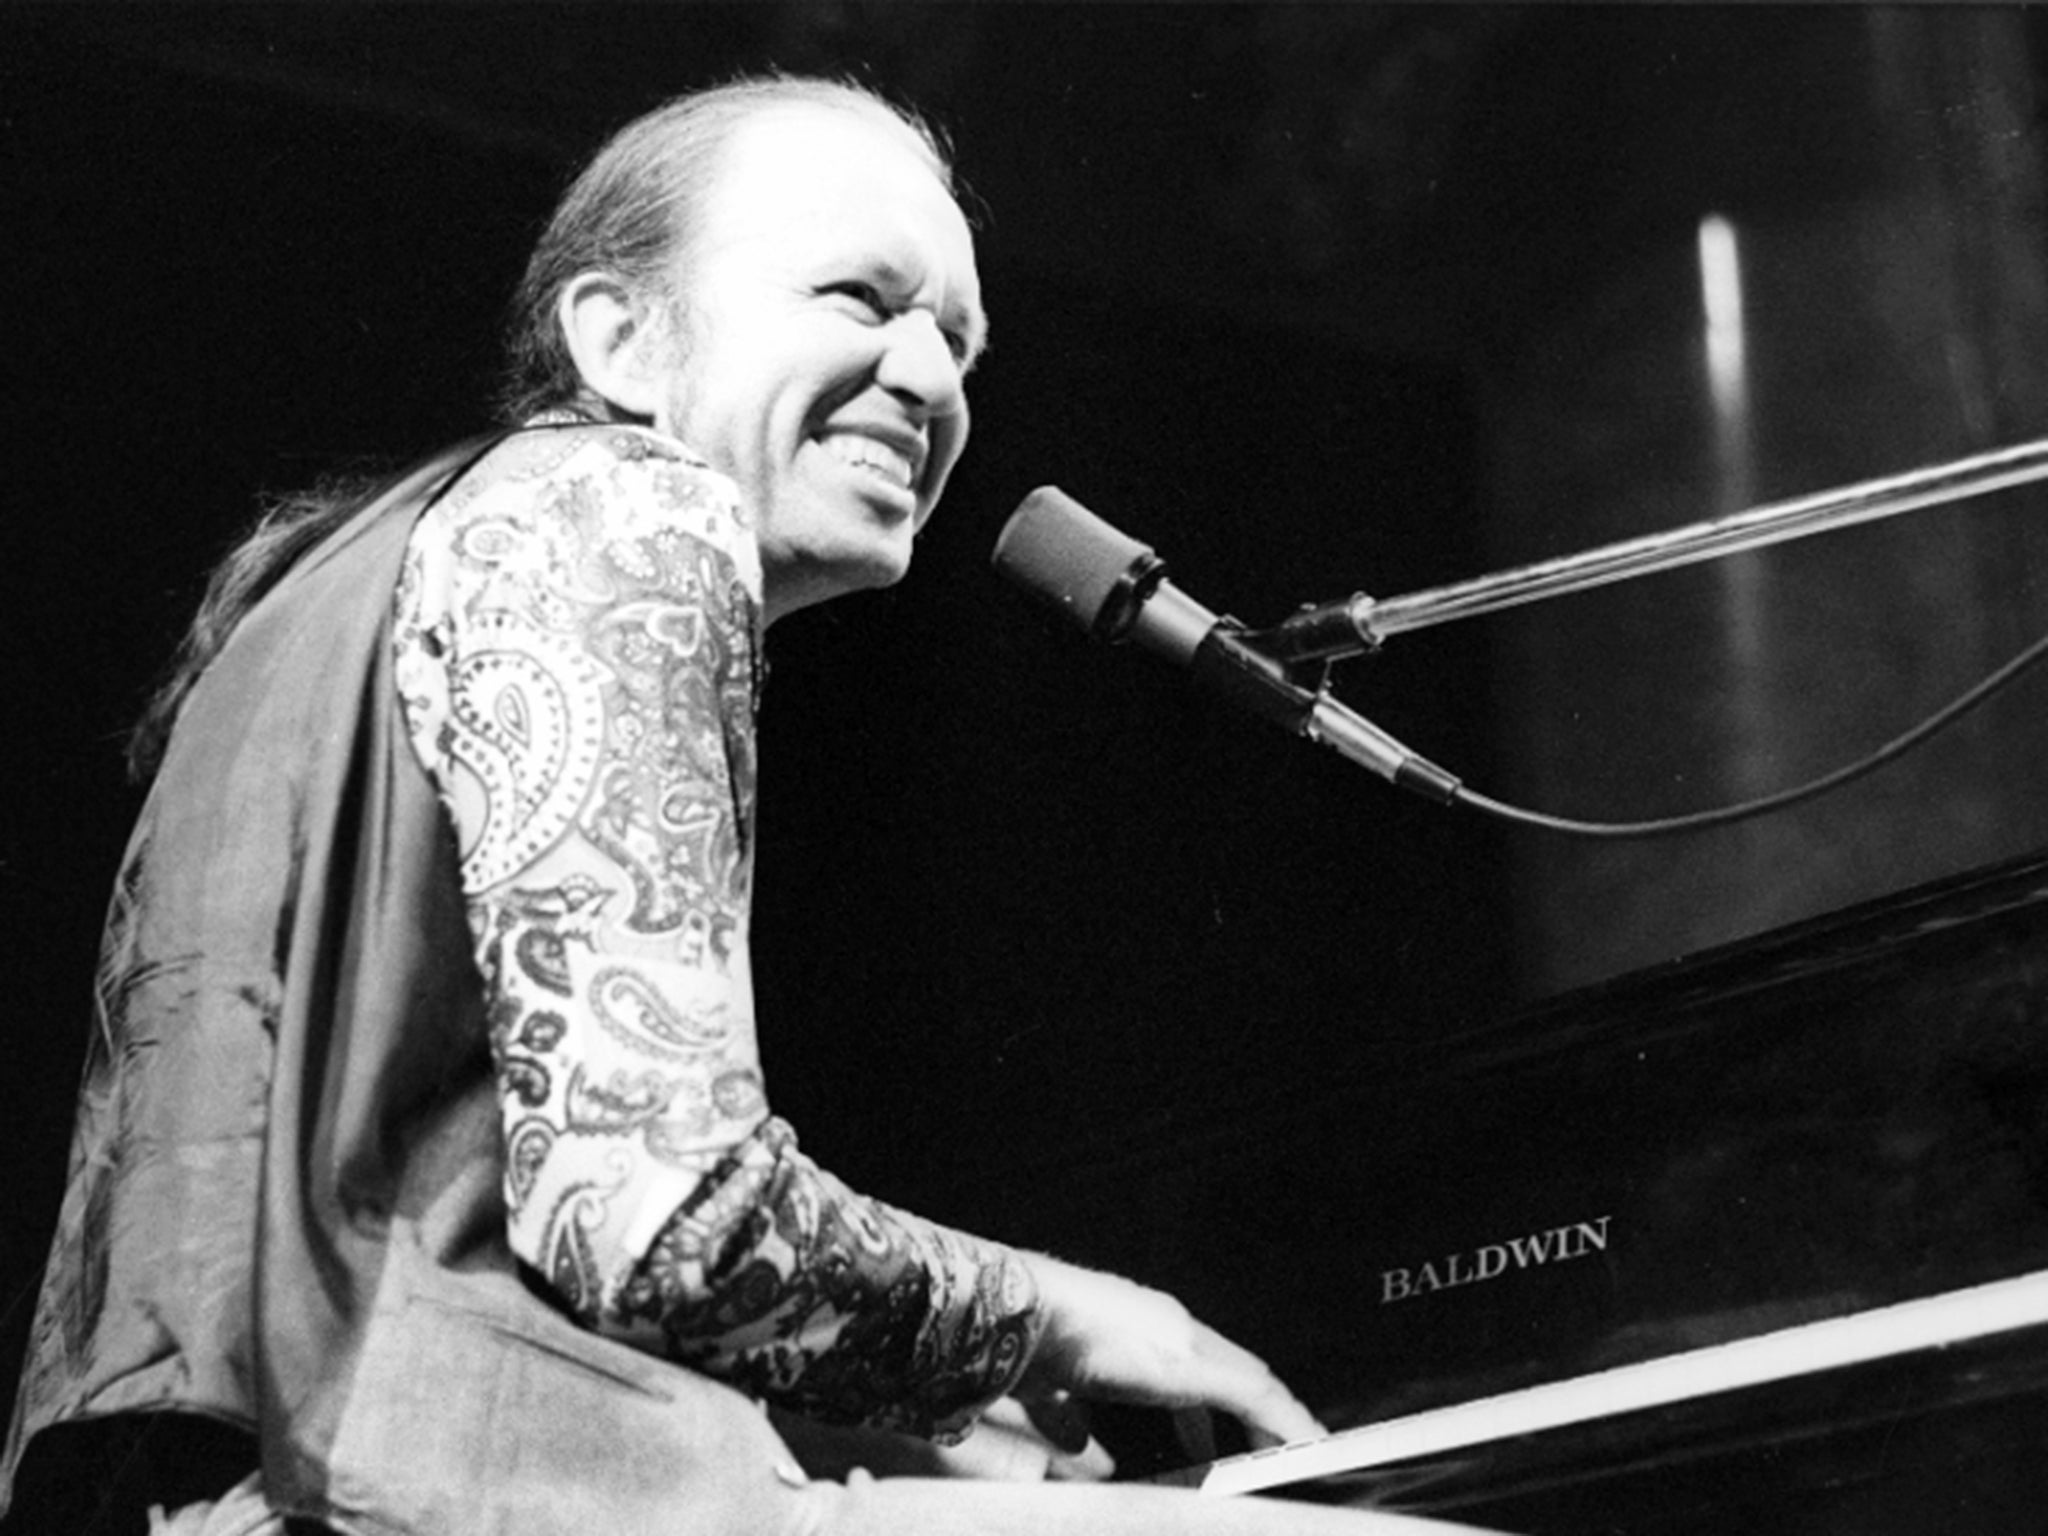 A jazz pianist and vocalist, Dorough wrote his first Schoolhouse Rock tune in 1971